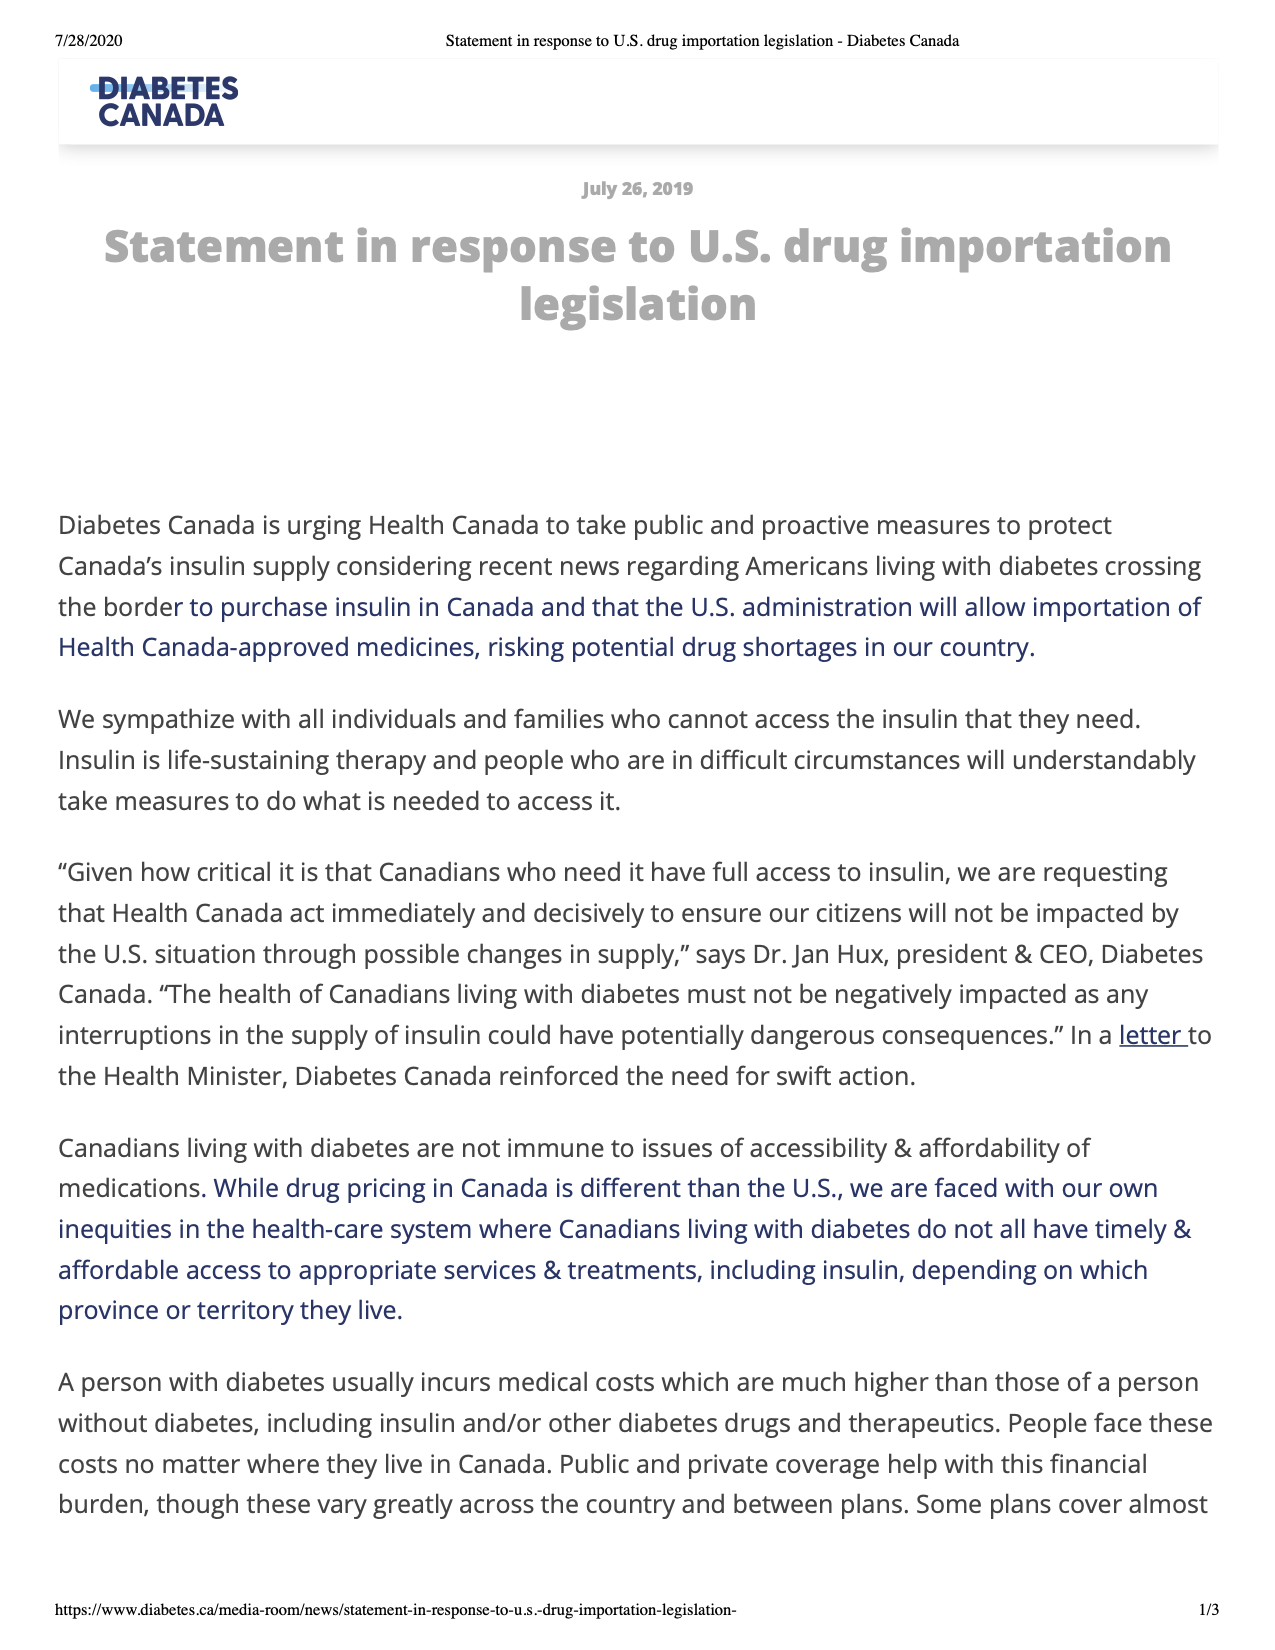 <a href="https://www.diabetes.ca/media-room/news/statement-in-response-to-u.s.-drug-importation-legislation-">Diabetes Canada's response<br> to U.S. importation,<br>  July 2019.</a>